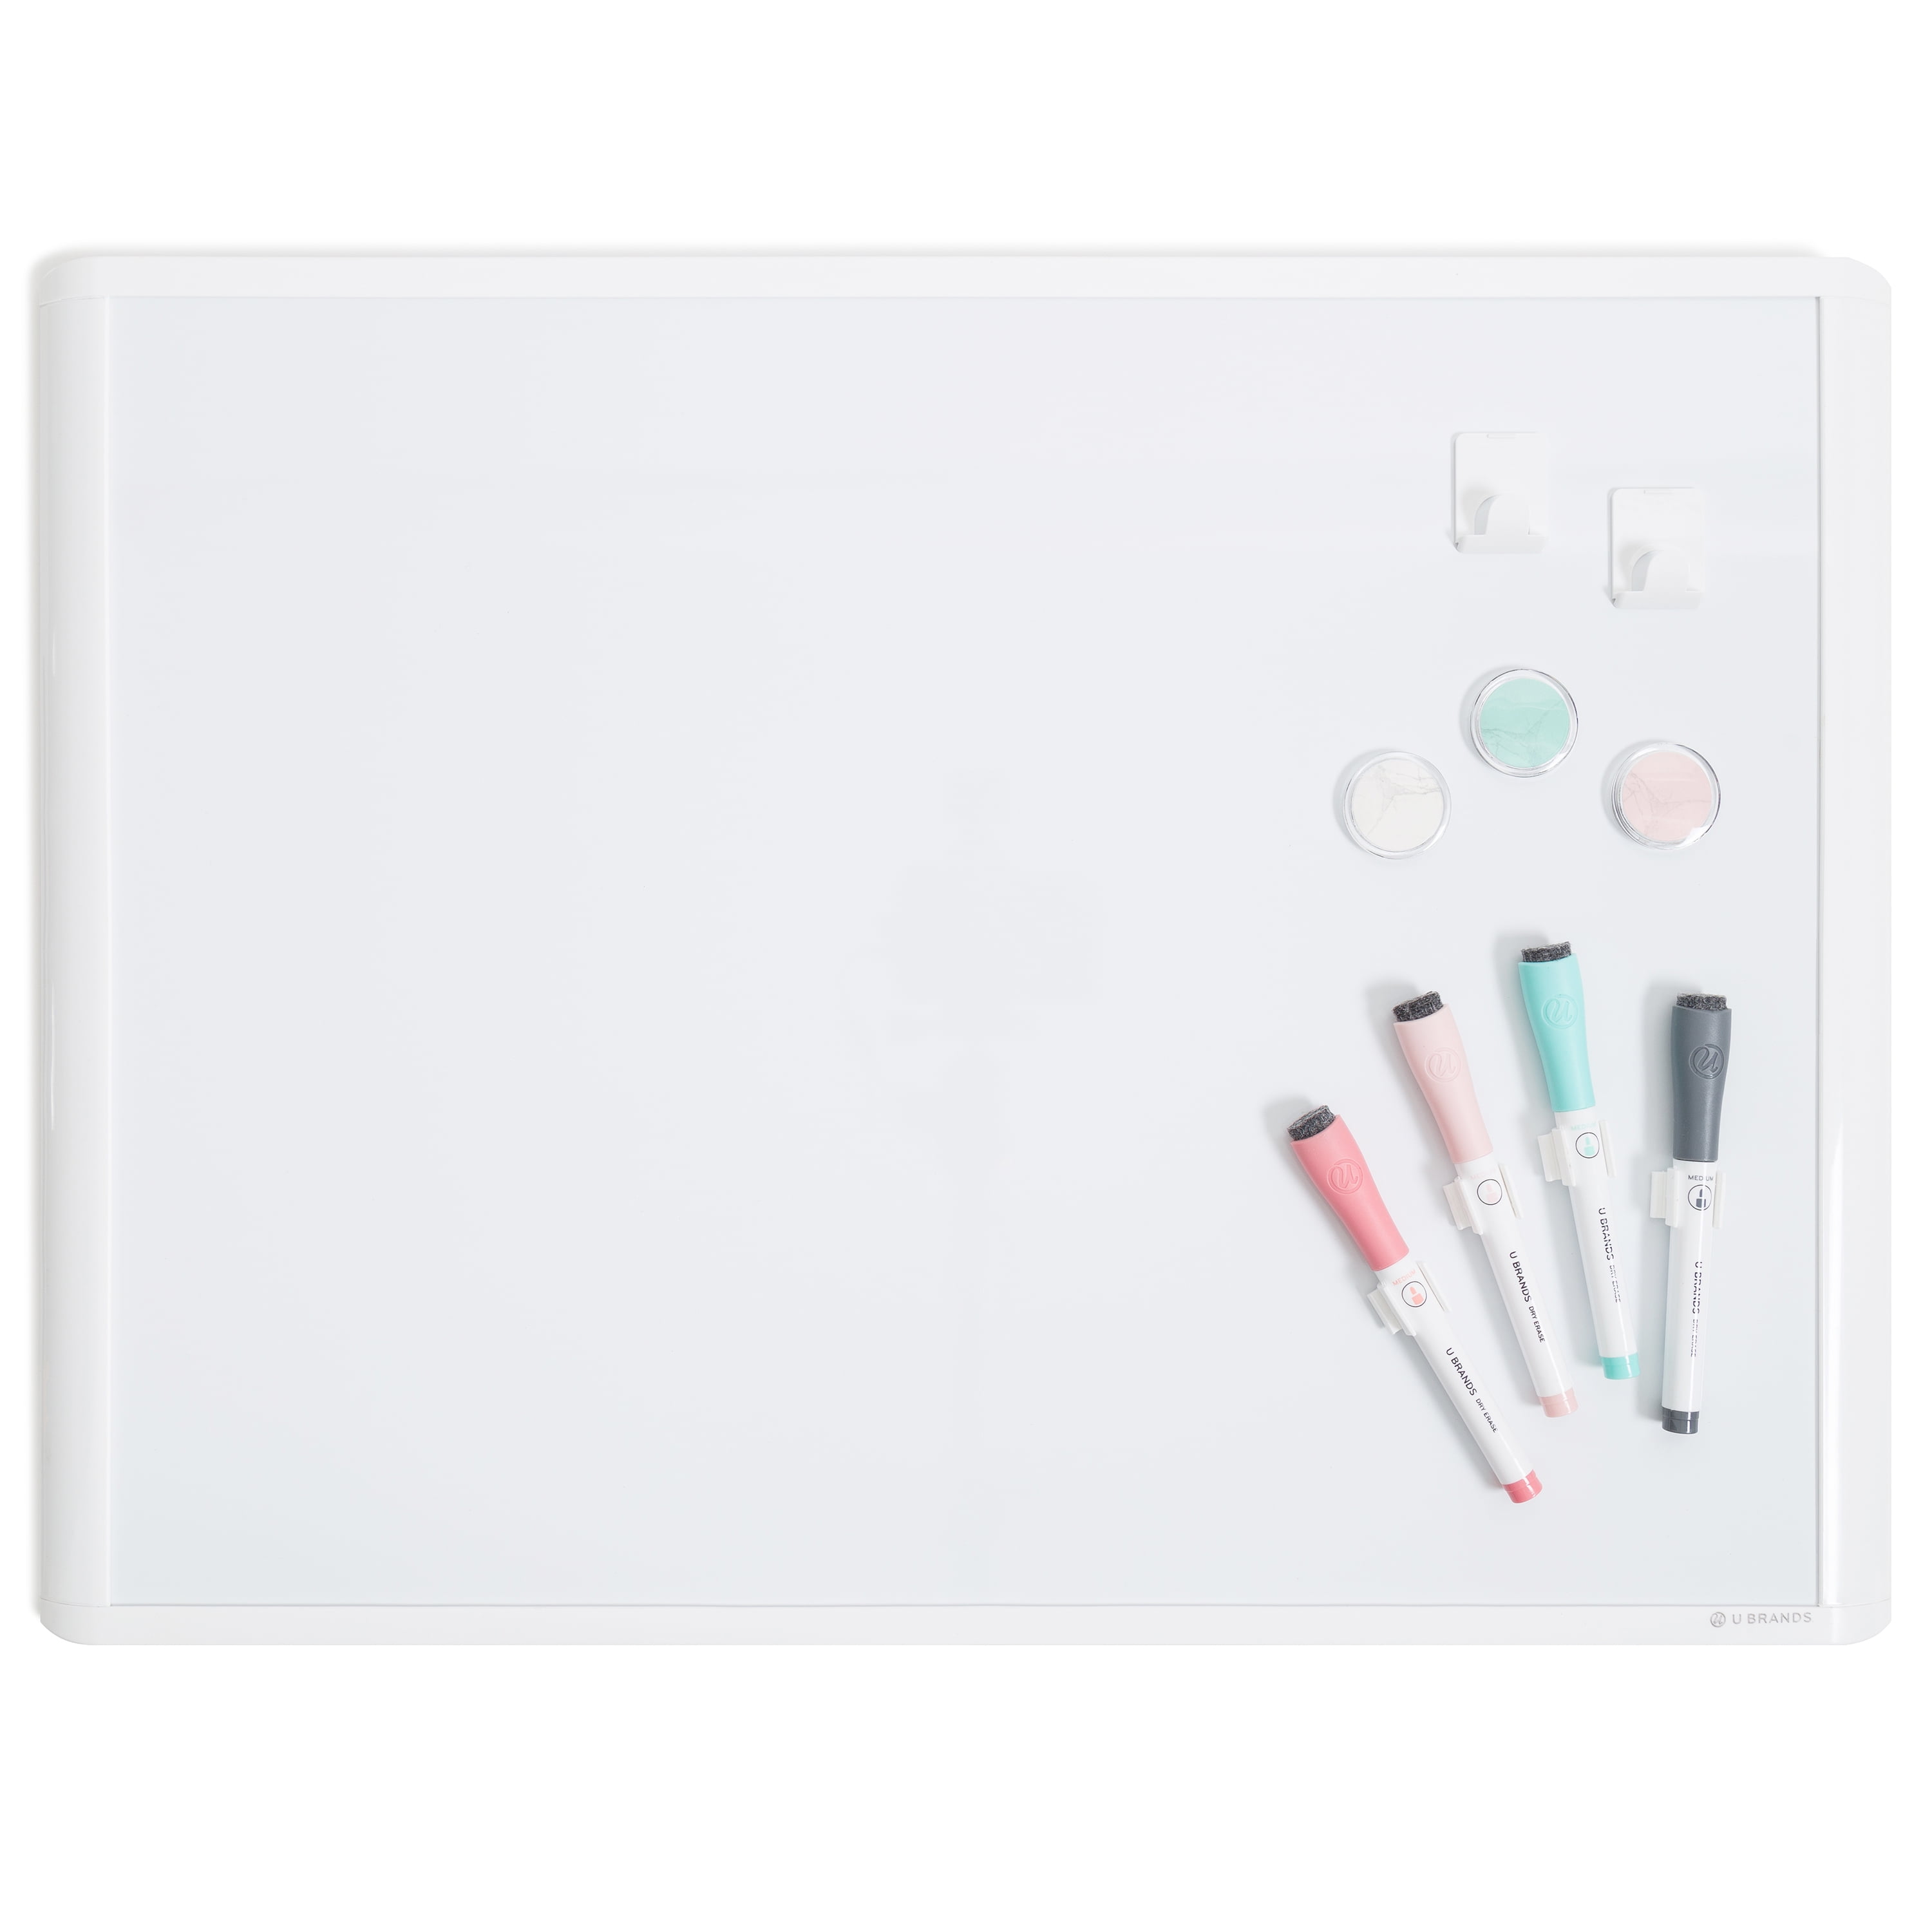 Premium Dry Erase Marker Kit: StoreSMART - Filing, Organizing, and Display  for Office, School, Warehouse, and Home